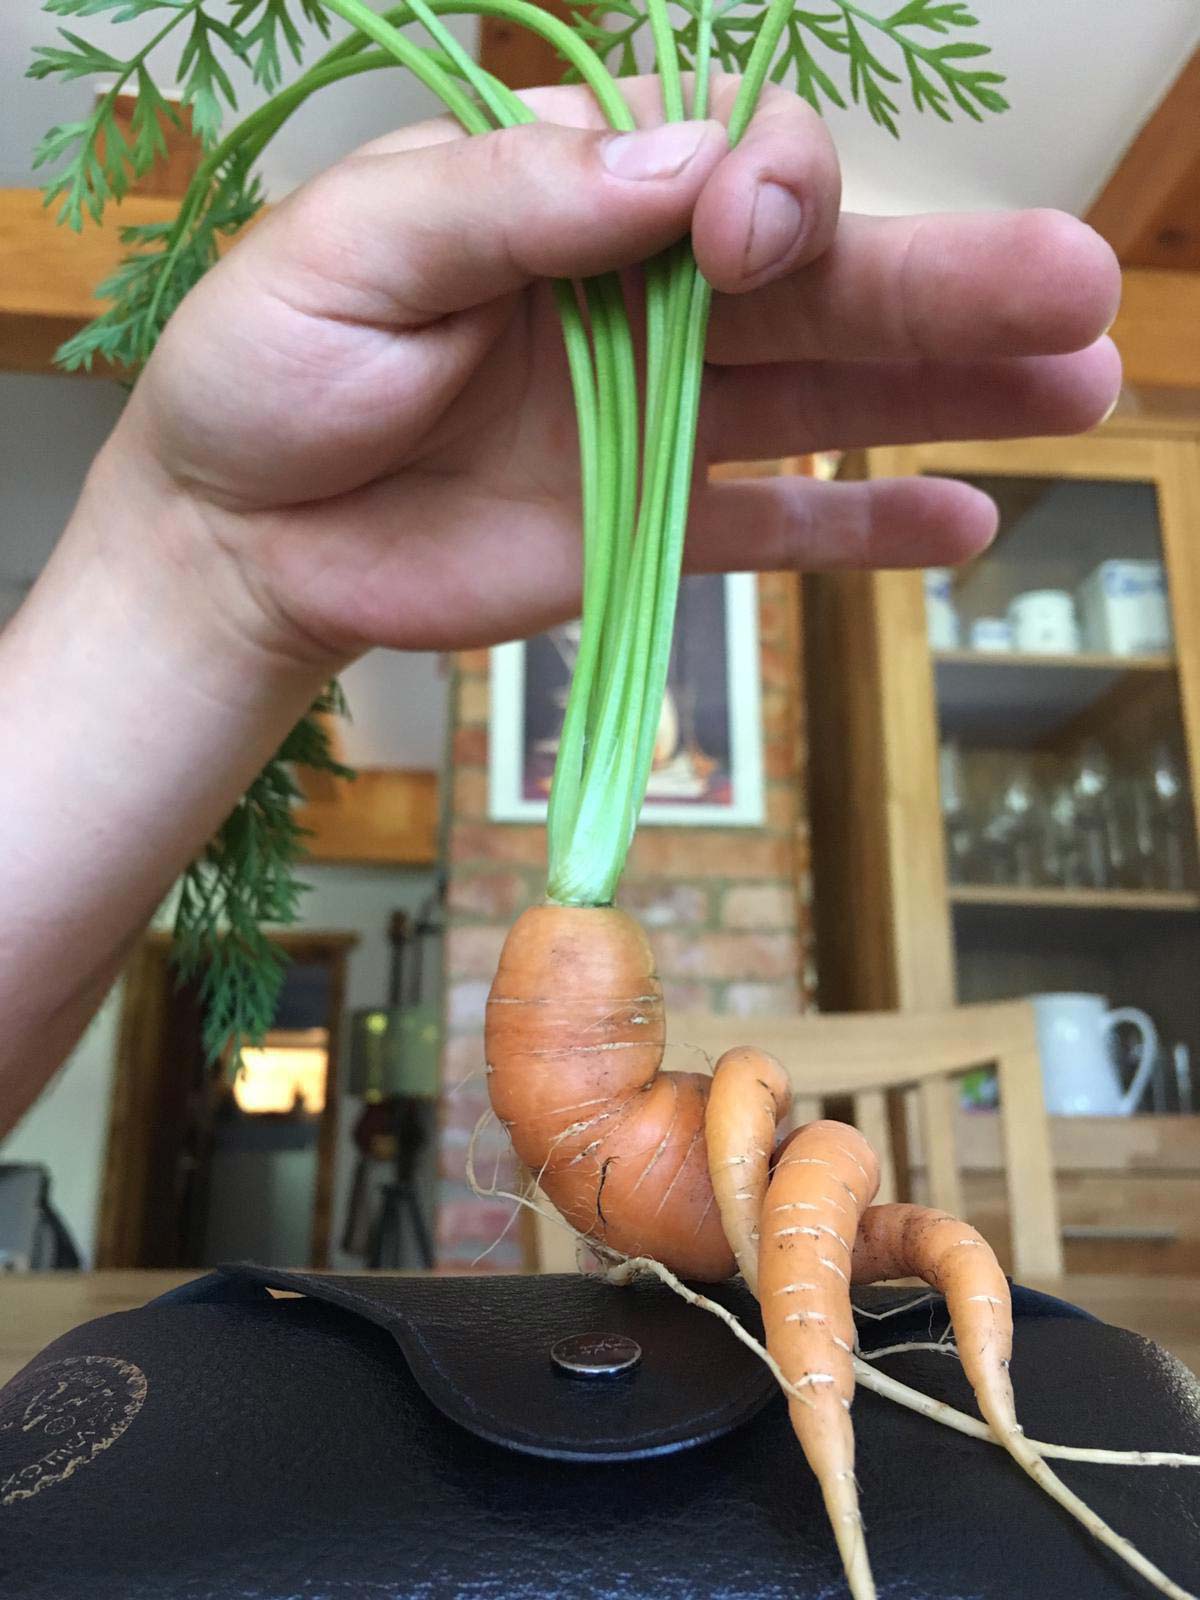 Draw me like one of your french carrots